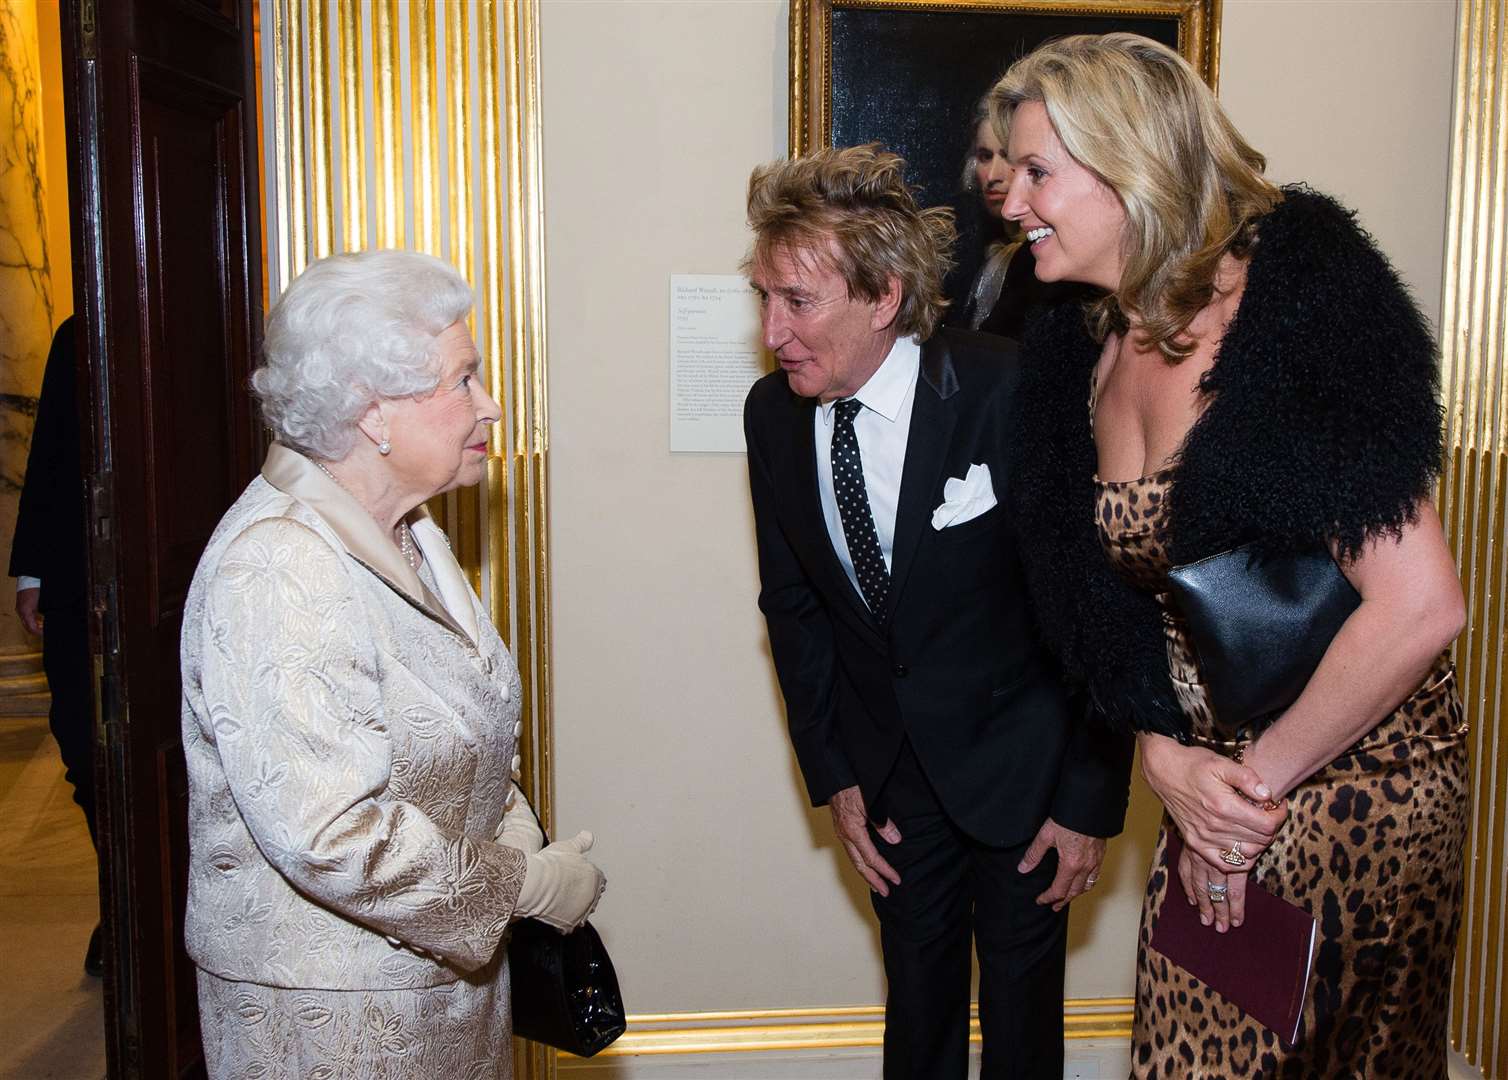 The Queen meets Sir Rod Stewart and his wife Penny Lancaster during a reception and awards ceremony at the Royal Academy of Arts, Burlington House, London (Jeff Spicer/PA)